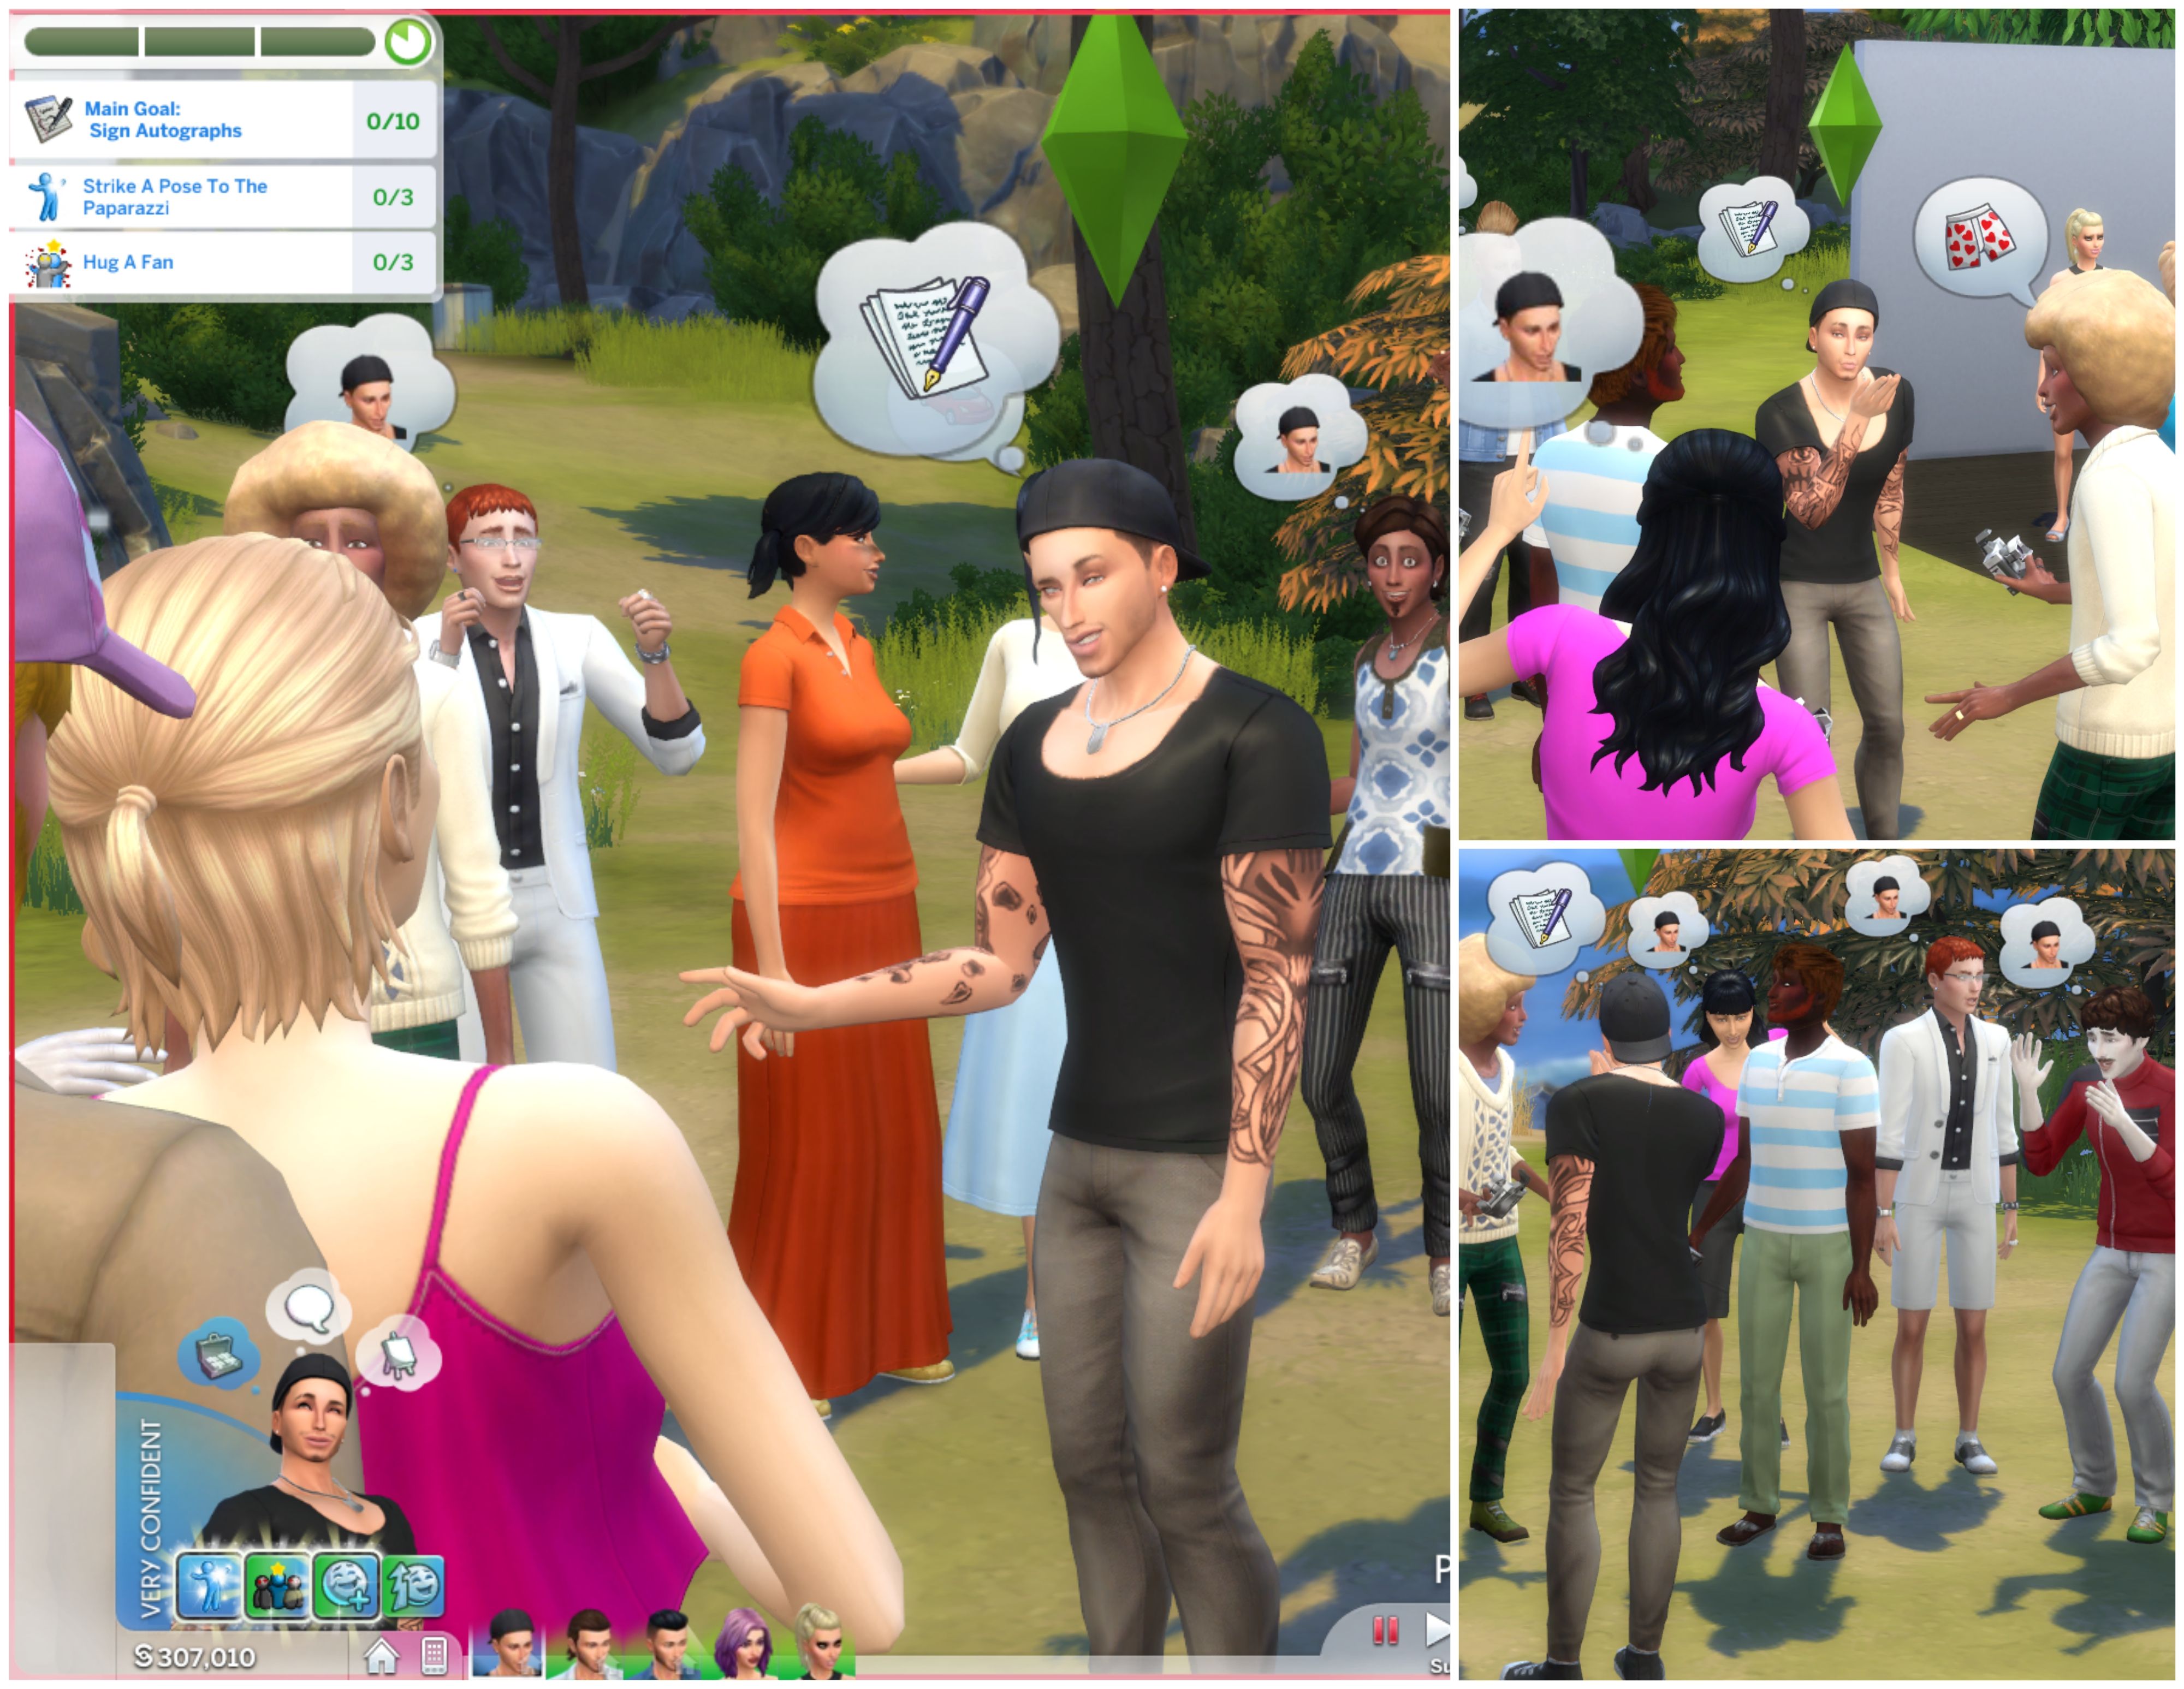 sims 4 road to fame mod free download